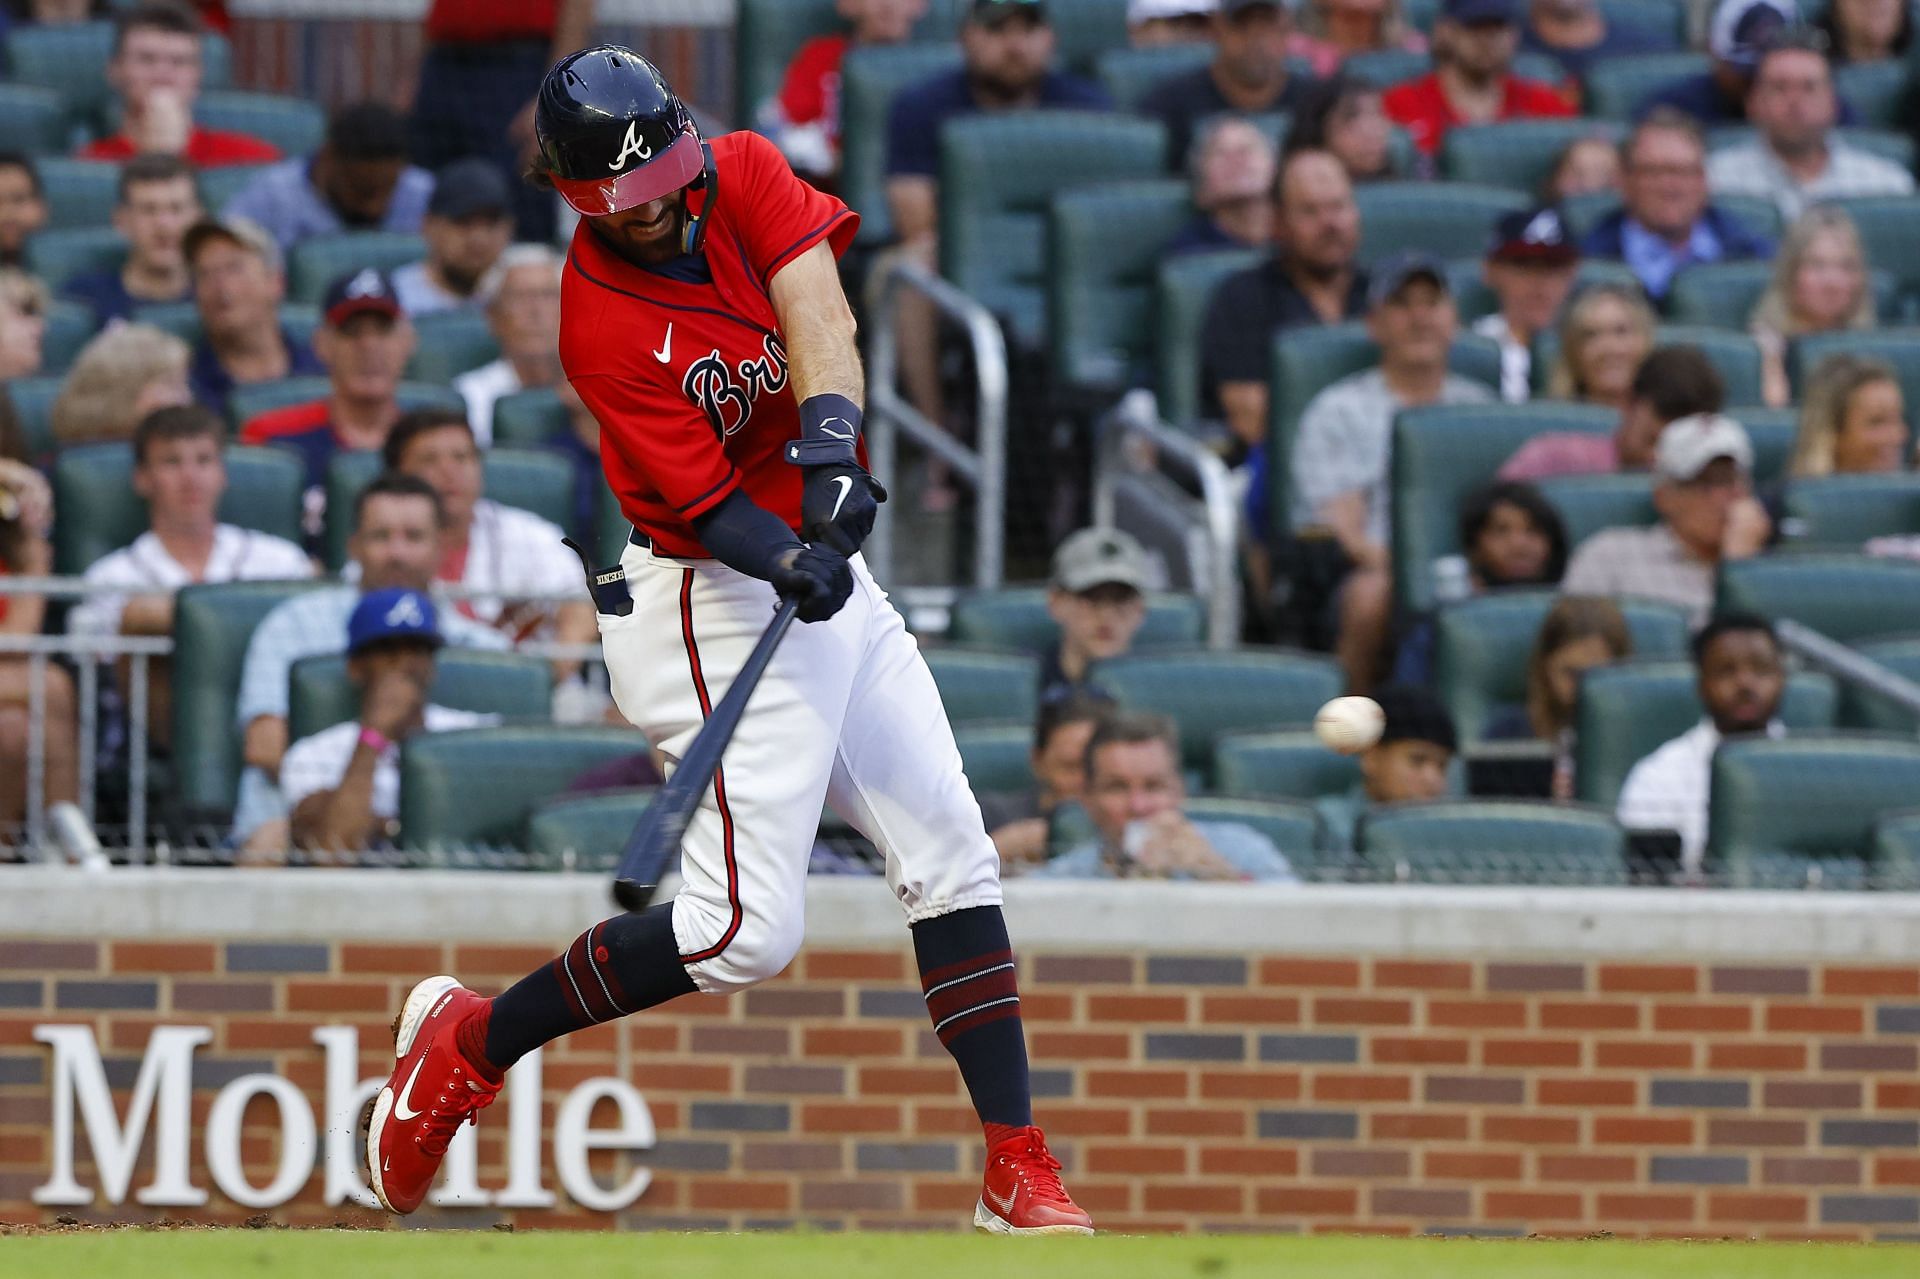 He's the leader': Dansby Swanson passionately shows he can be a